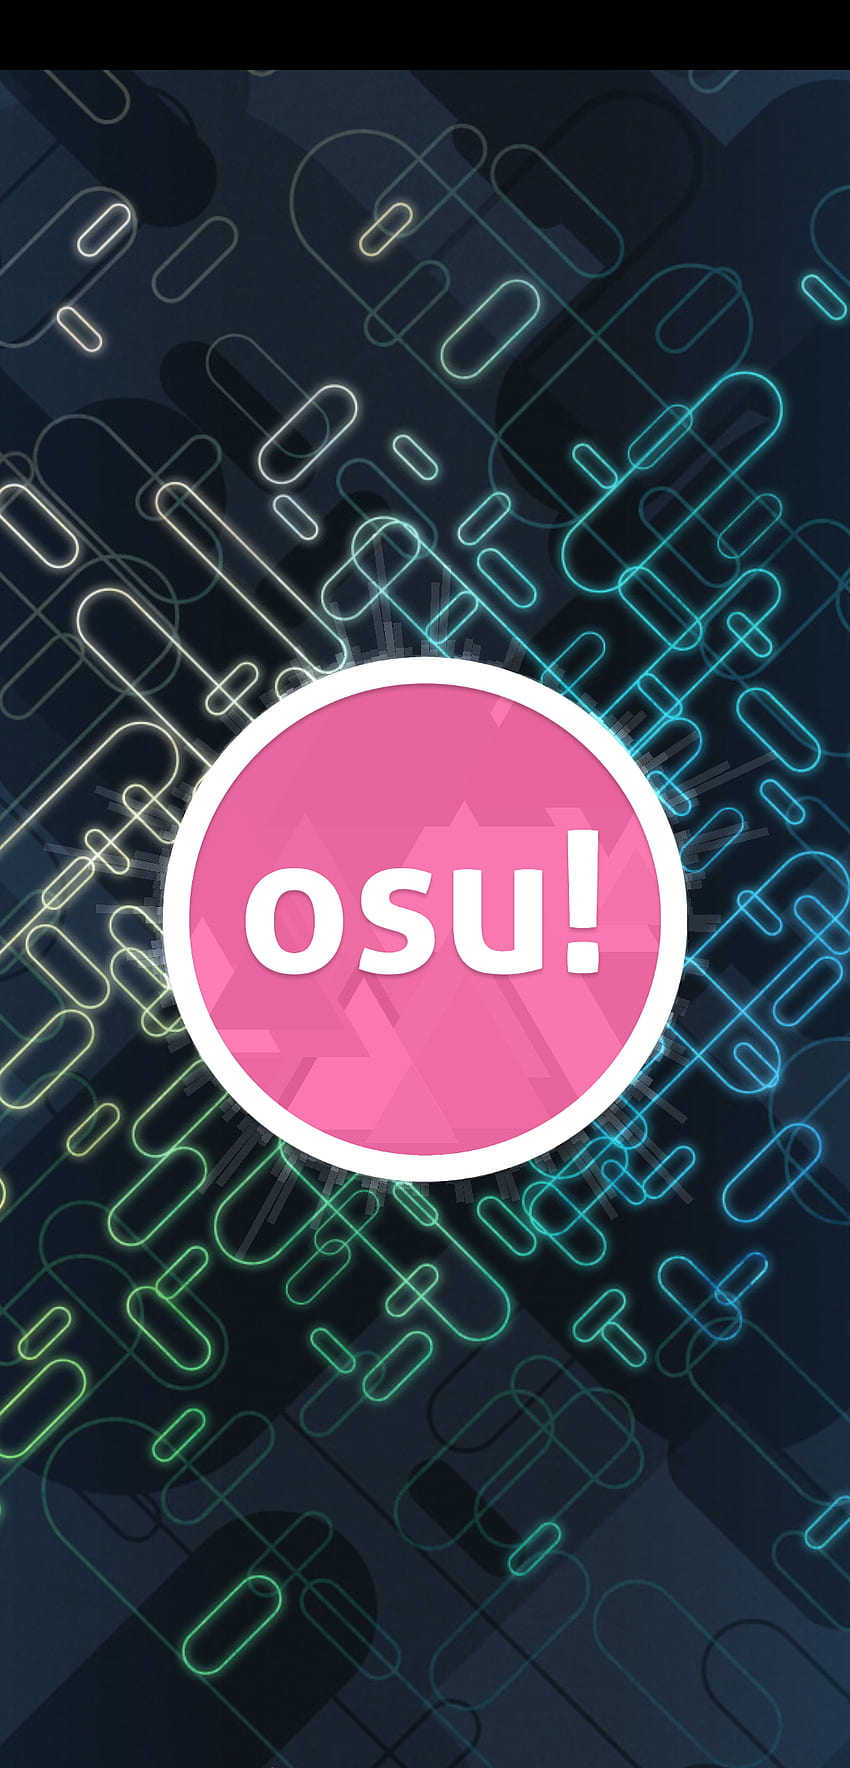 You get a really nice mobile when using osu!lazer HD phone wallpaper